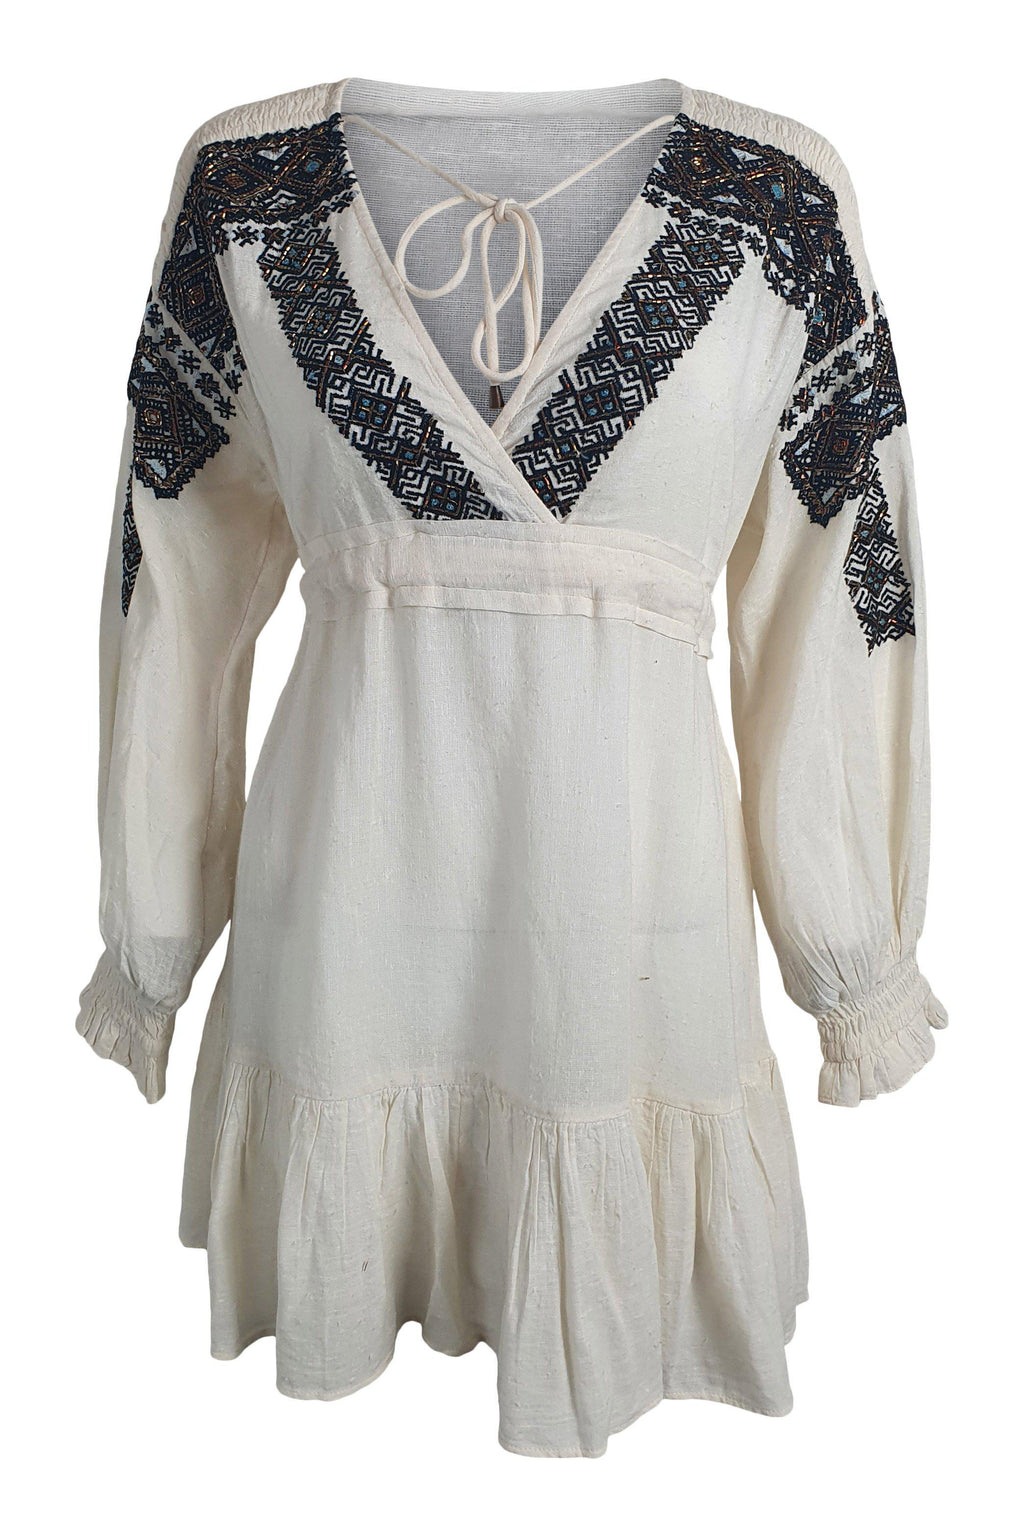 FREE PEOPLE Movement Cotton Blend Ivory Beaded Mini Dress (XS)-Free People-The Freperie